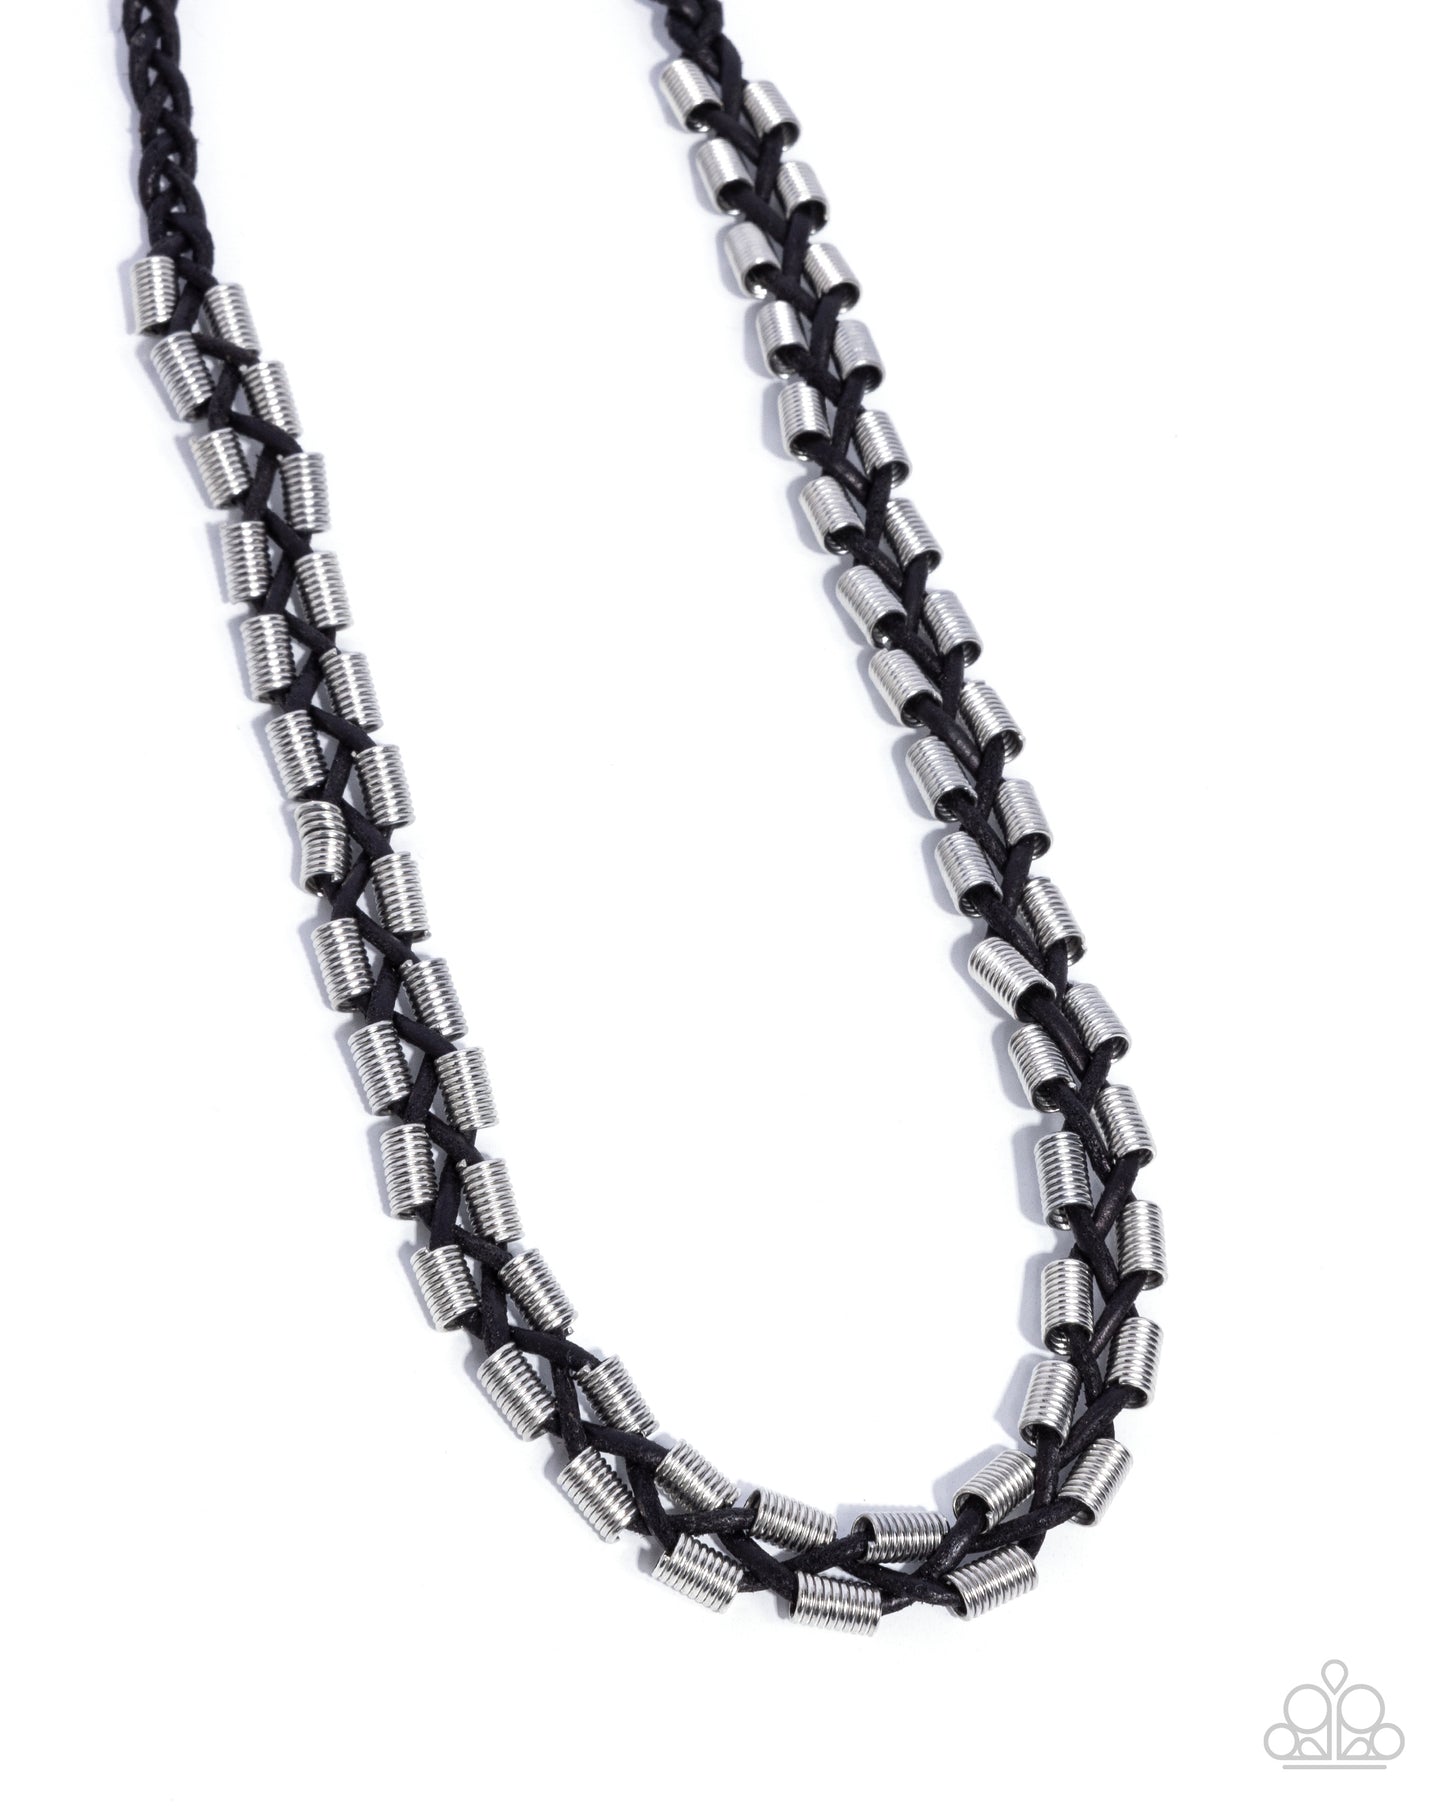 <p>Featuring dainty silver beads that are rippling with ribbed textures, black suede cords decoratively braid and weave below the collar for an urban flair. Features a button loop closure.</p> <p><i> Sold as one individual necklace.</i></p>